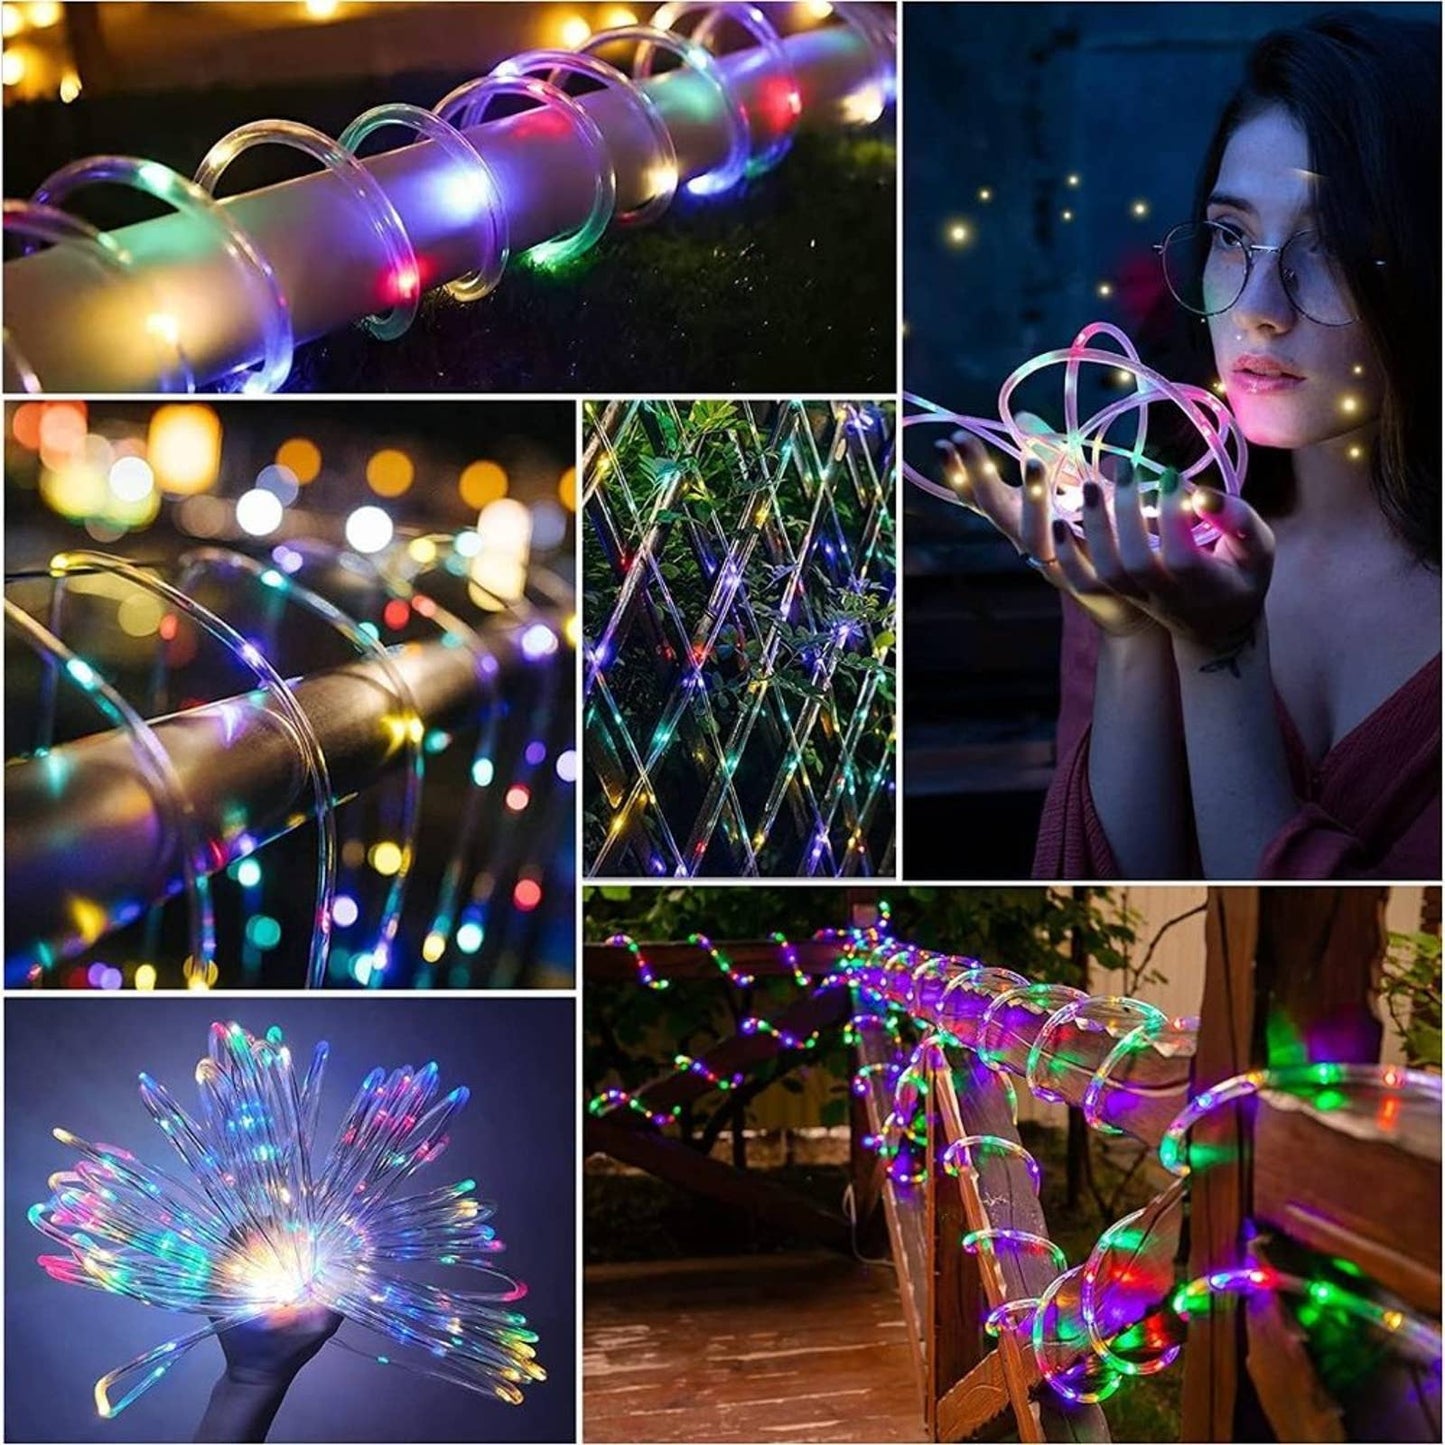 SINGCHUNGTE Colorful Rope Lights, 66Ft 200 LED Waterproof Rope Lights